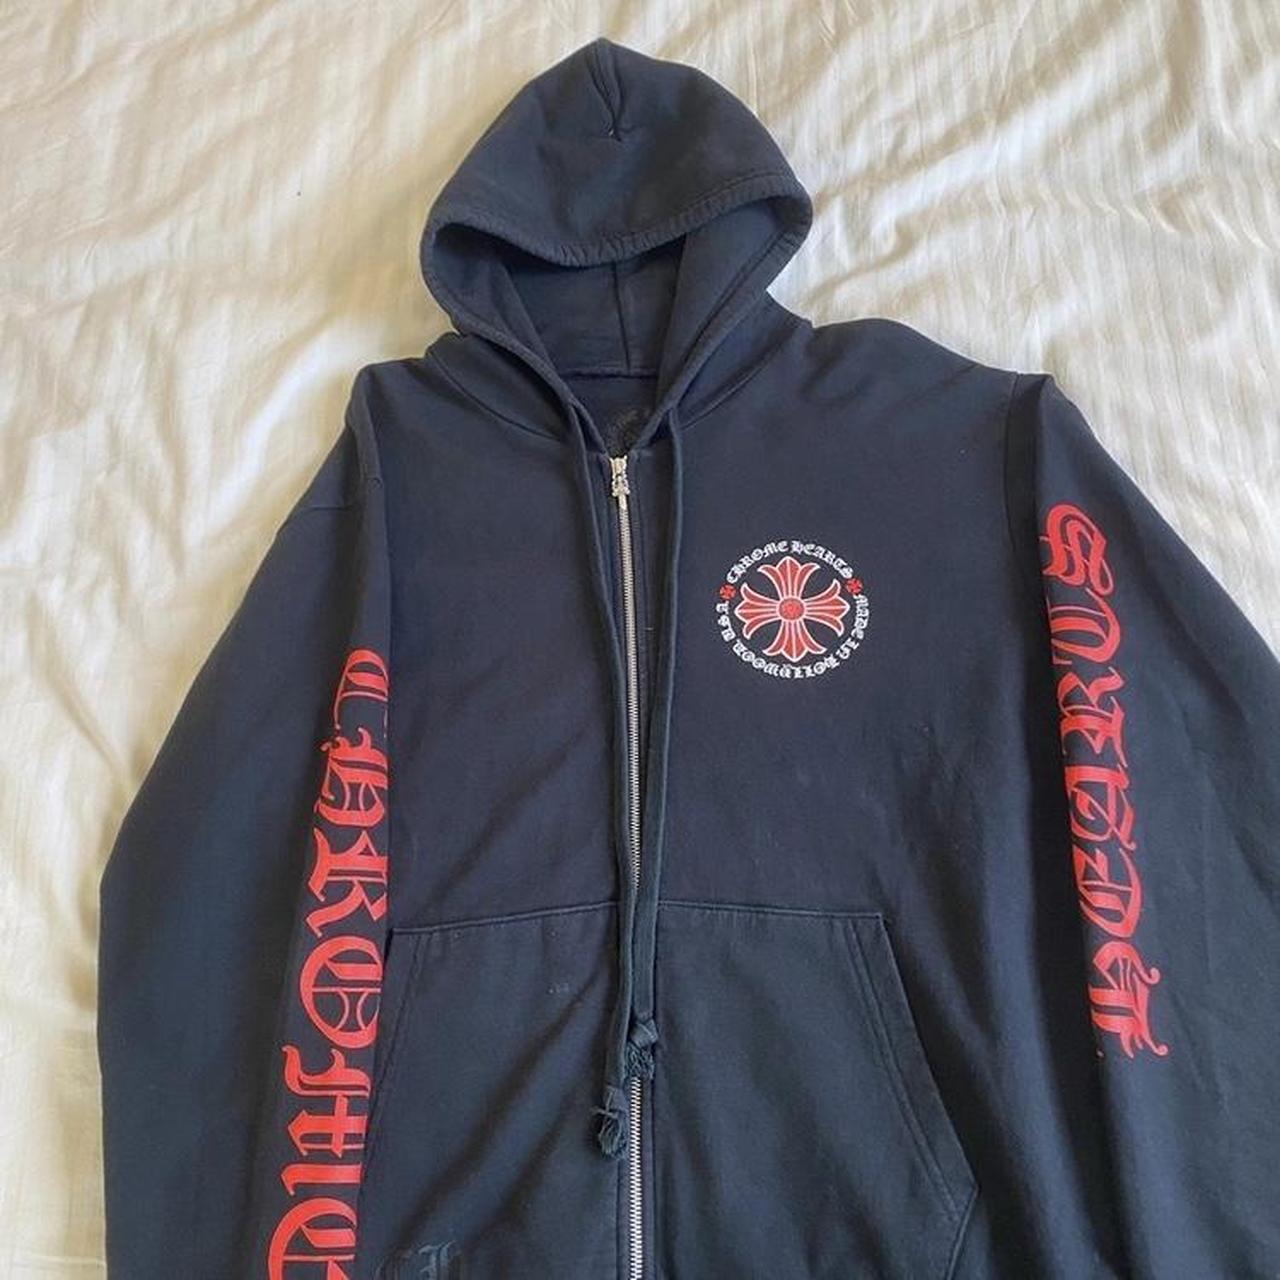 Chrome Hearts Men's Black and Red Hoodie | Depop